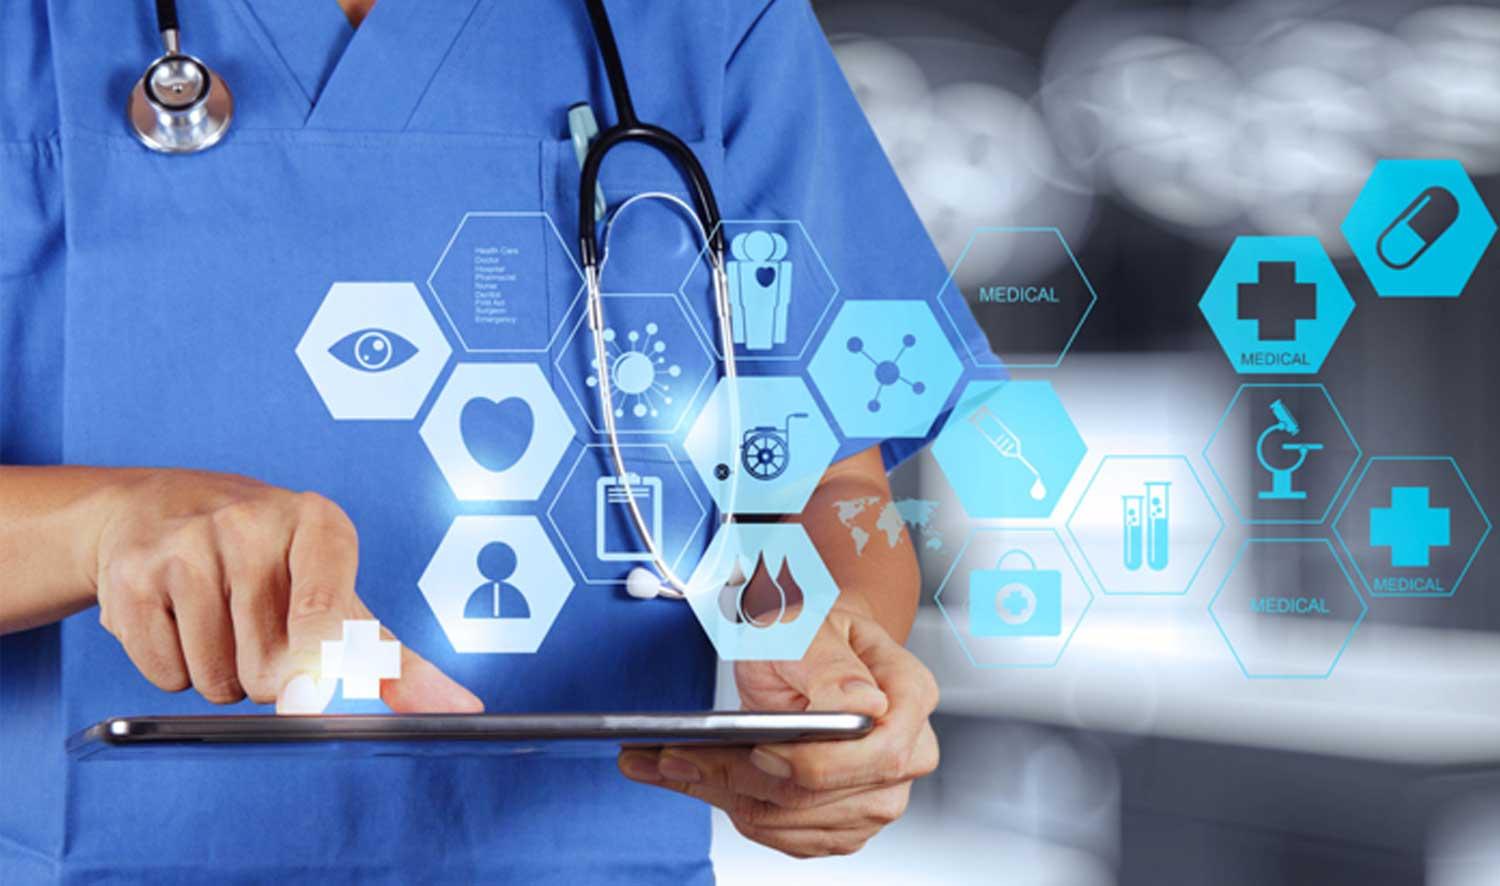 What are the future telemedicine trends to look out for in India?